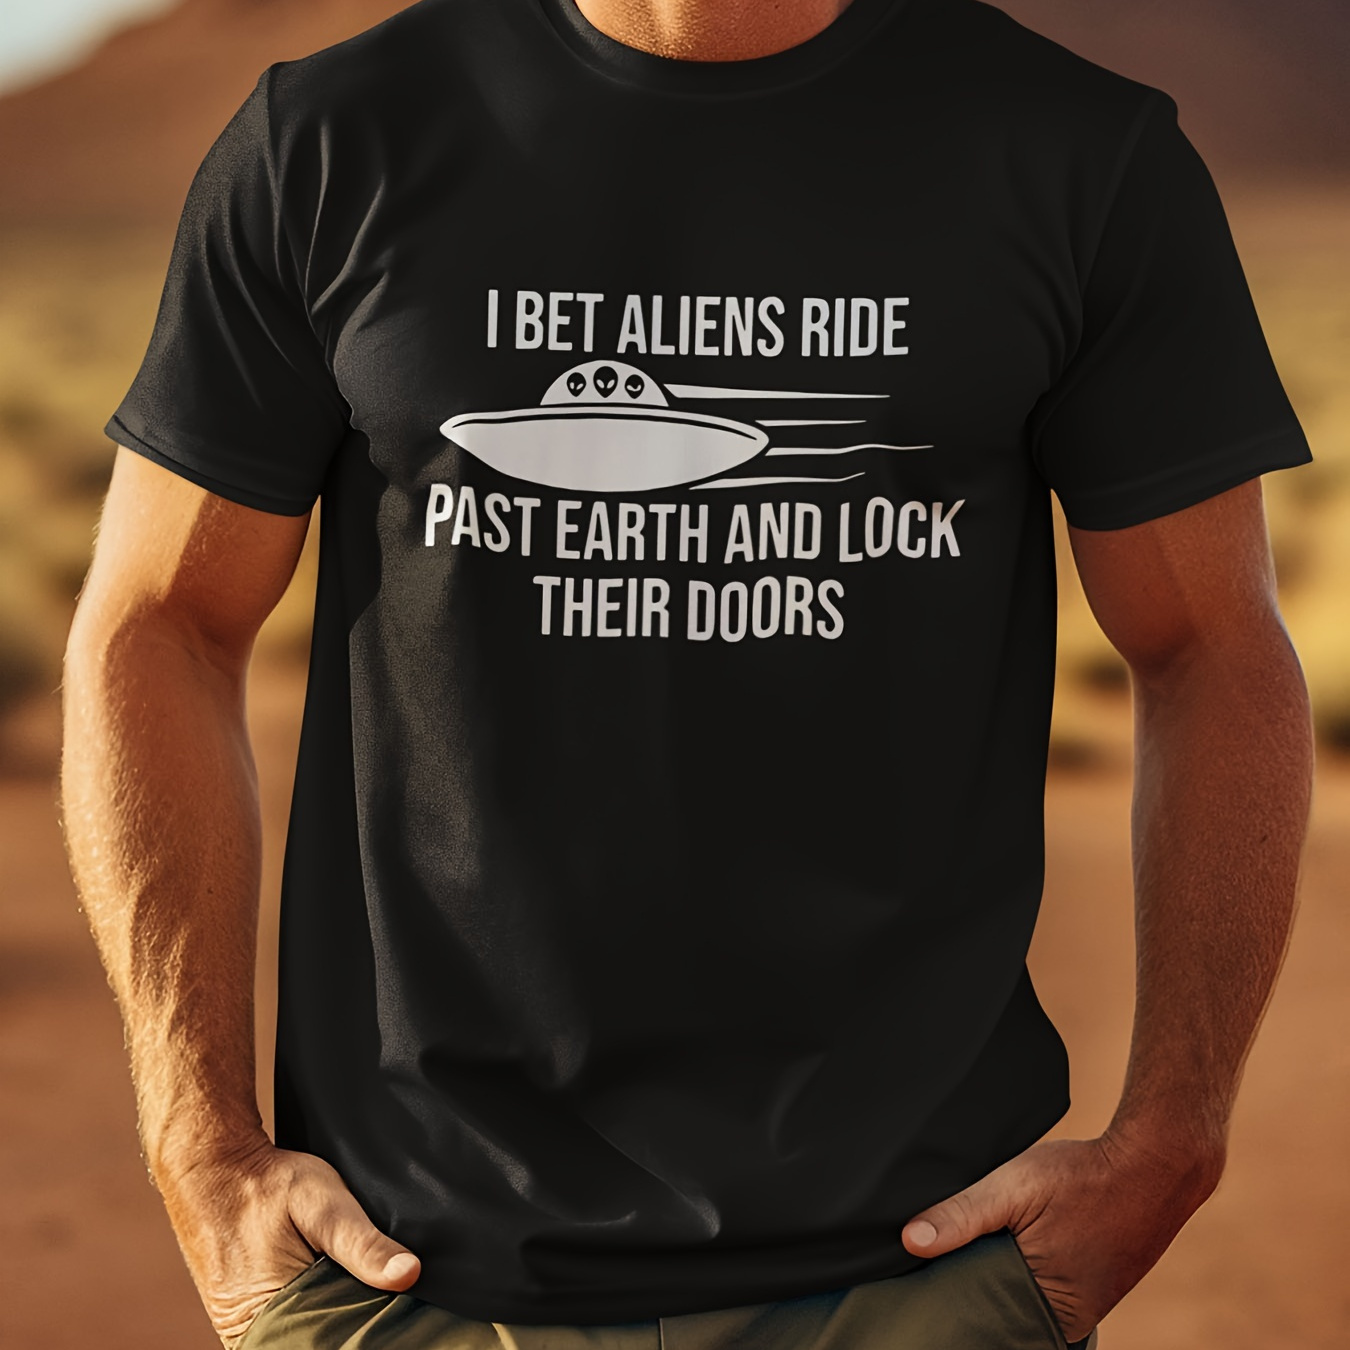 

'i Bet Aliens Ride Past Earth And Lock Their Doors' - Summer Men's Cotton Personalized Printing Short-sleeved T-shirt - Comfortable & Breathable Novel Tops